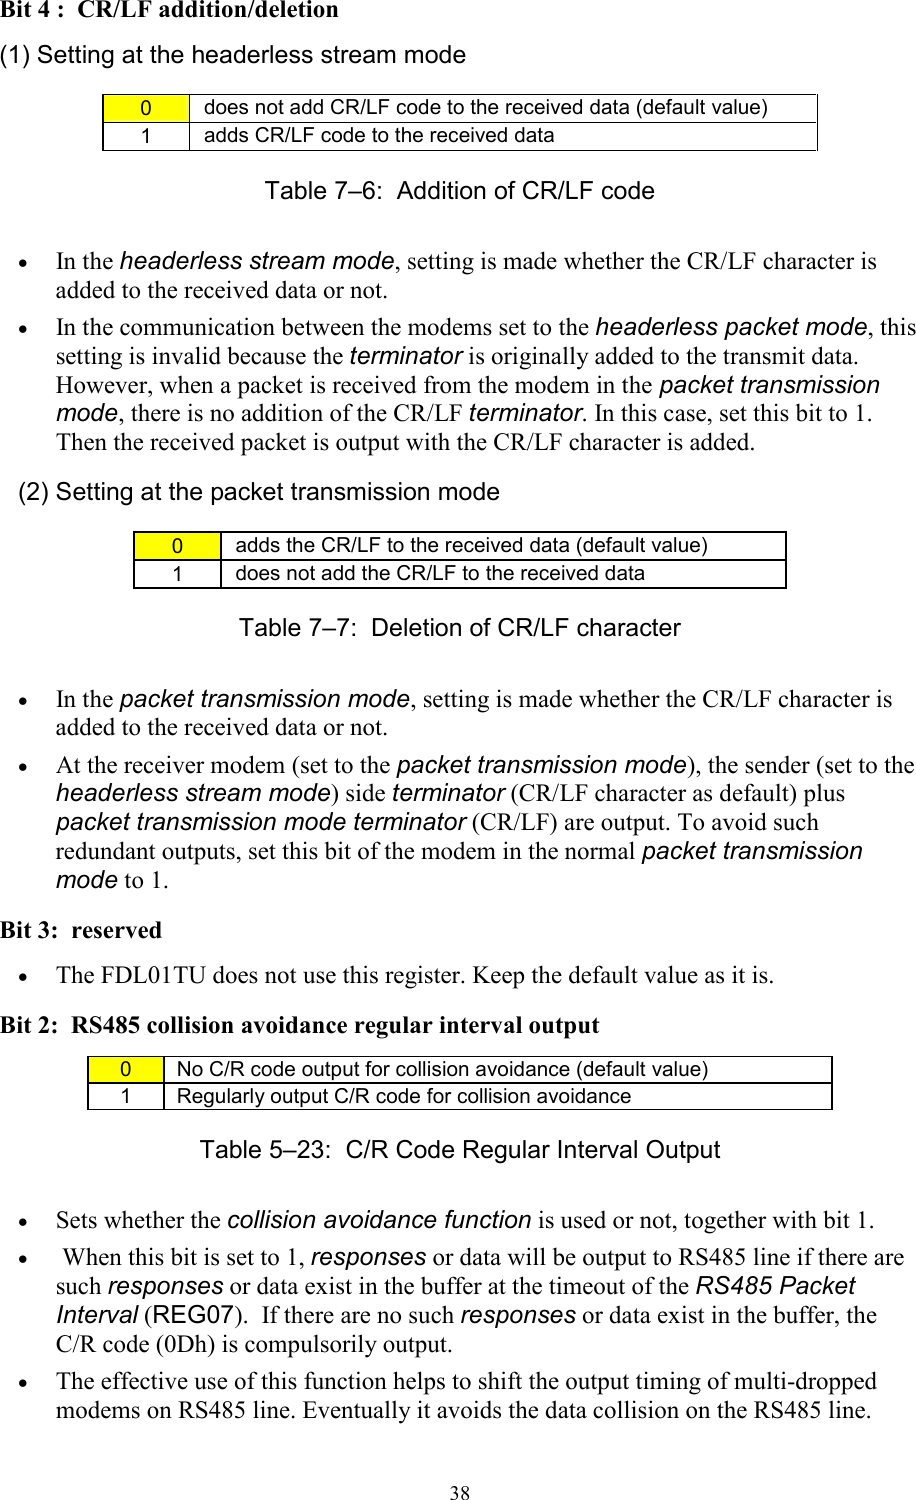   38 Bit 4 :  CR/LF addition/deletion (1) Setting at the headerless stream mode 0  does not add CR/LF code to the received data (default value) 1  adds CR/LF code to the received data Table 7–6:  Addition of CR/LF code  • In the headerless stream mode, setting is made whether the CR/LF character is added to the received data or not.  • In the communication between the modems set to the headerless packet mode, this setting is invalid because the terminator is originally added to the transmit data.  However, when a packet is received from the modem in the packet transmission mode, there is no addition of the CR/LF terminator. In this case, set this bit to 1. Then the received packet is output with the CR/LF character is added. (2) Setting at the packet transmission mode 0  adds the CR/LF to the received data (default value) 1  does not add the CR/LF to the received data Table 7–7:  Deletion of CR/LF character • In the packet transmission mode, setting is made whether the CR/LF character is added to the received data or not. • At the receiver modem (set to the packet transmission mode), the sender (set to the headerless stream mode) side terminator (CR/LF character as default) plus packet transmission mode terminator (CR/LF) are output. To avoid such redundant outputs, set this bit of the modem in the normal packet transmission mode to 1. Bit 3:  reserved • The FDL01TU does not use this register. Keep the default value as it is. Bit 2:  RS485 collision avoidance regular interval output 0  No C/R code output for collision avoidance (default value) 1  Regularly output C/R code for collision avoidance Table 5–23:  C/R Code Regular Interval Output • Sets whether the collision avoidance function is used or not, together with bit 1. •  When this bit is set to 1, responses or data will be output to RS485 line if there are such responses or data exist in the buffer at the timeout of the RS485 Packet Interval (REG07).  If there are no such responses or data exist in the buffer, the C/R code (0Dh) is compulsorily output. • The effective use of this function helps to shift the output timing of multi-dropped  modems on RS485 line. Eventually it avoids the data collision on the RS485 line.  